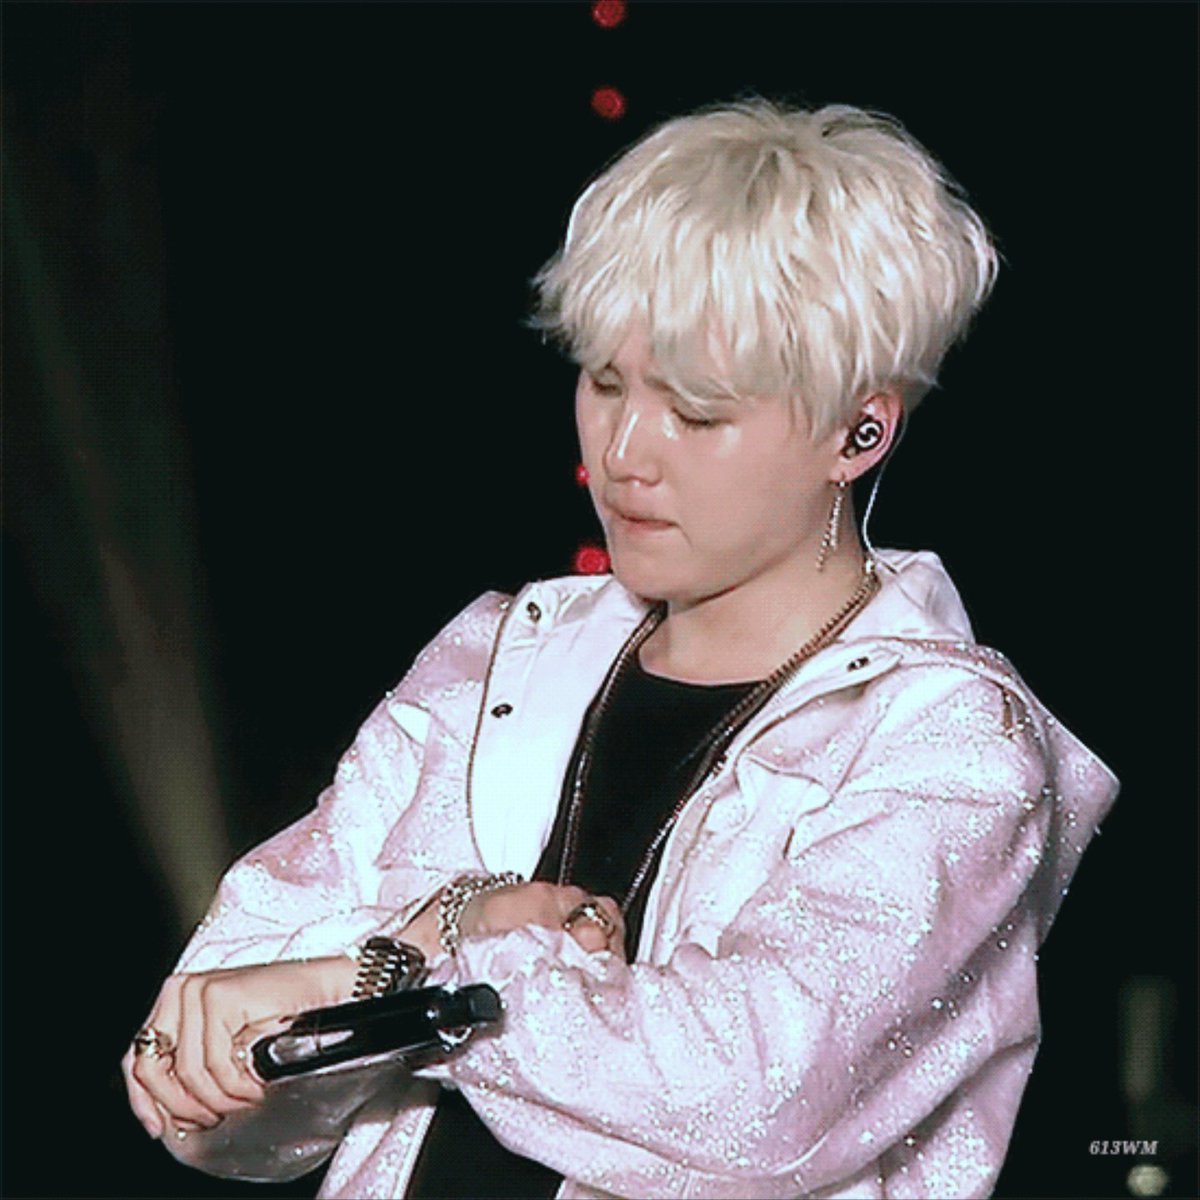 suga pics on Twitter: "yoongi look at his rolex will always be a kink  https://t.co/sBJd2FvryF" / Twitter